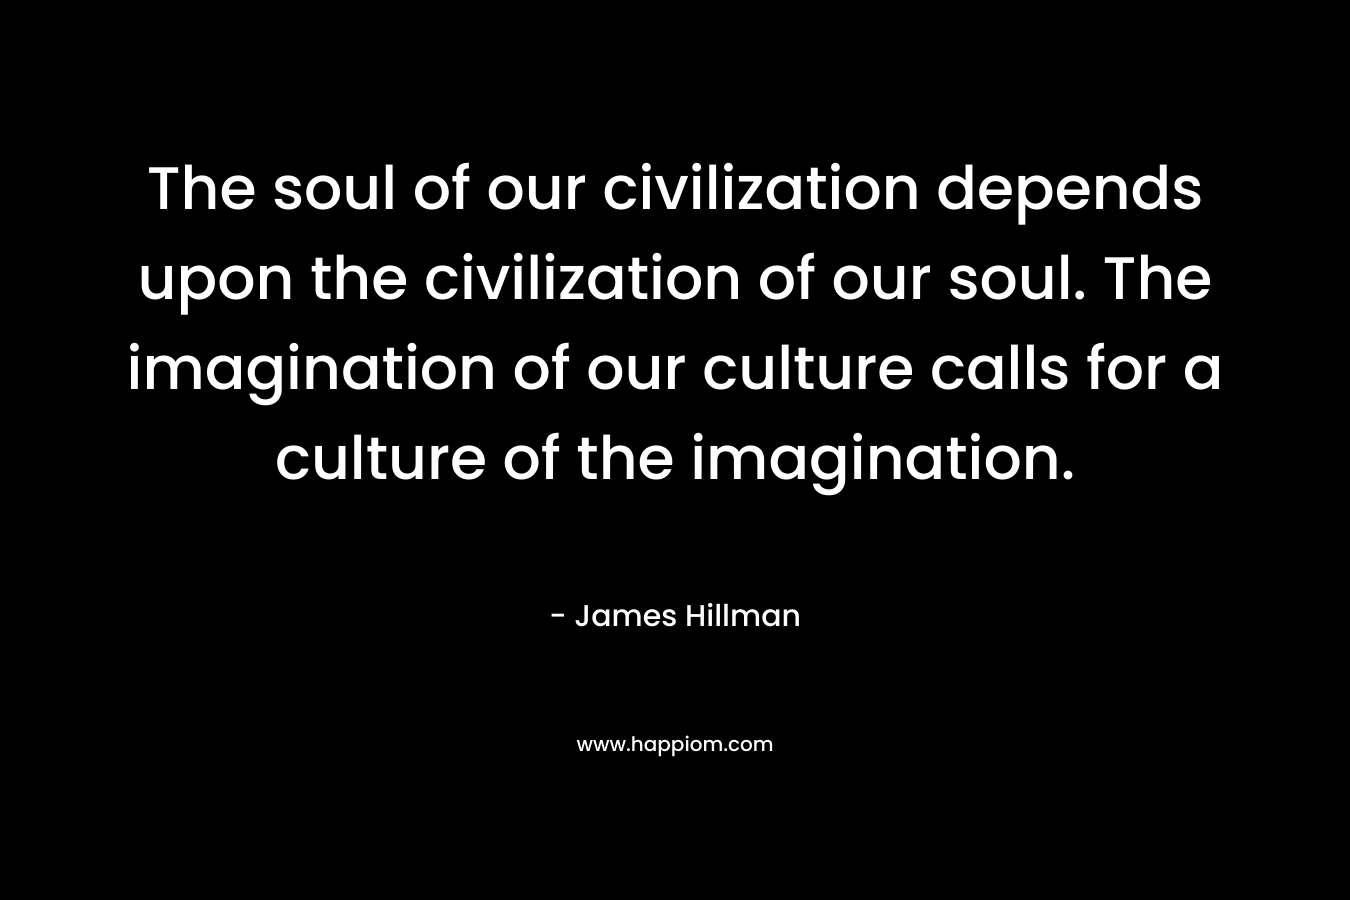 The soul of our civilization depends upon the civilization of our soul. The imagination of our culture calls for a culture of the imagination. – James Hillman